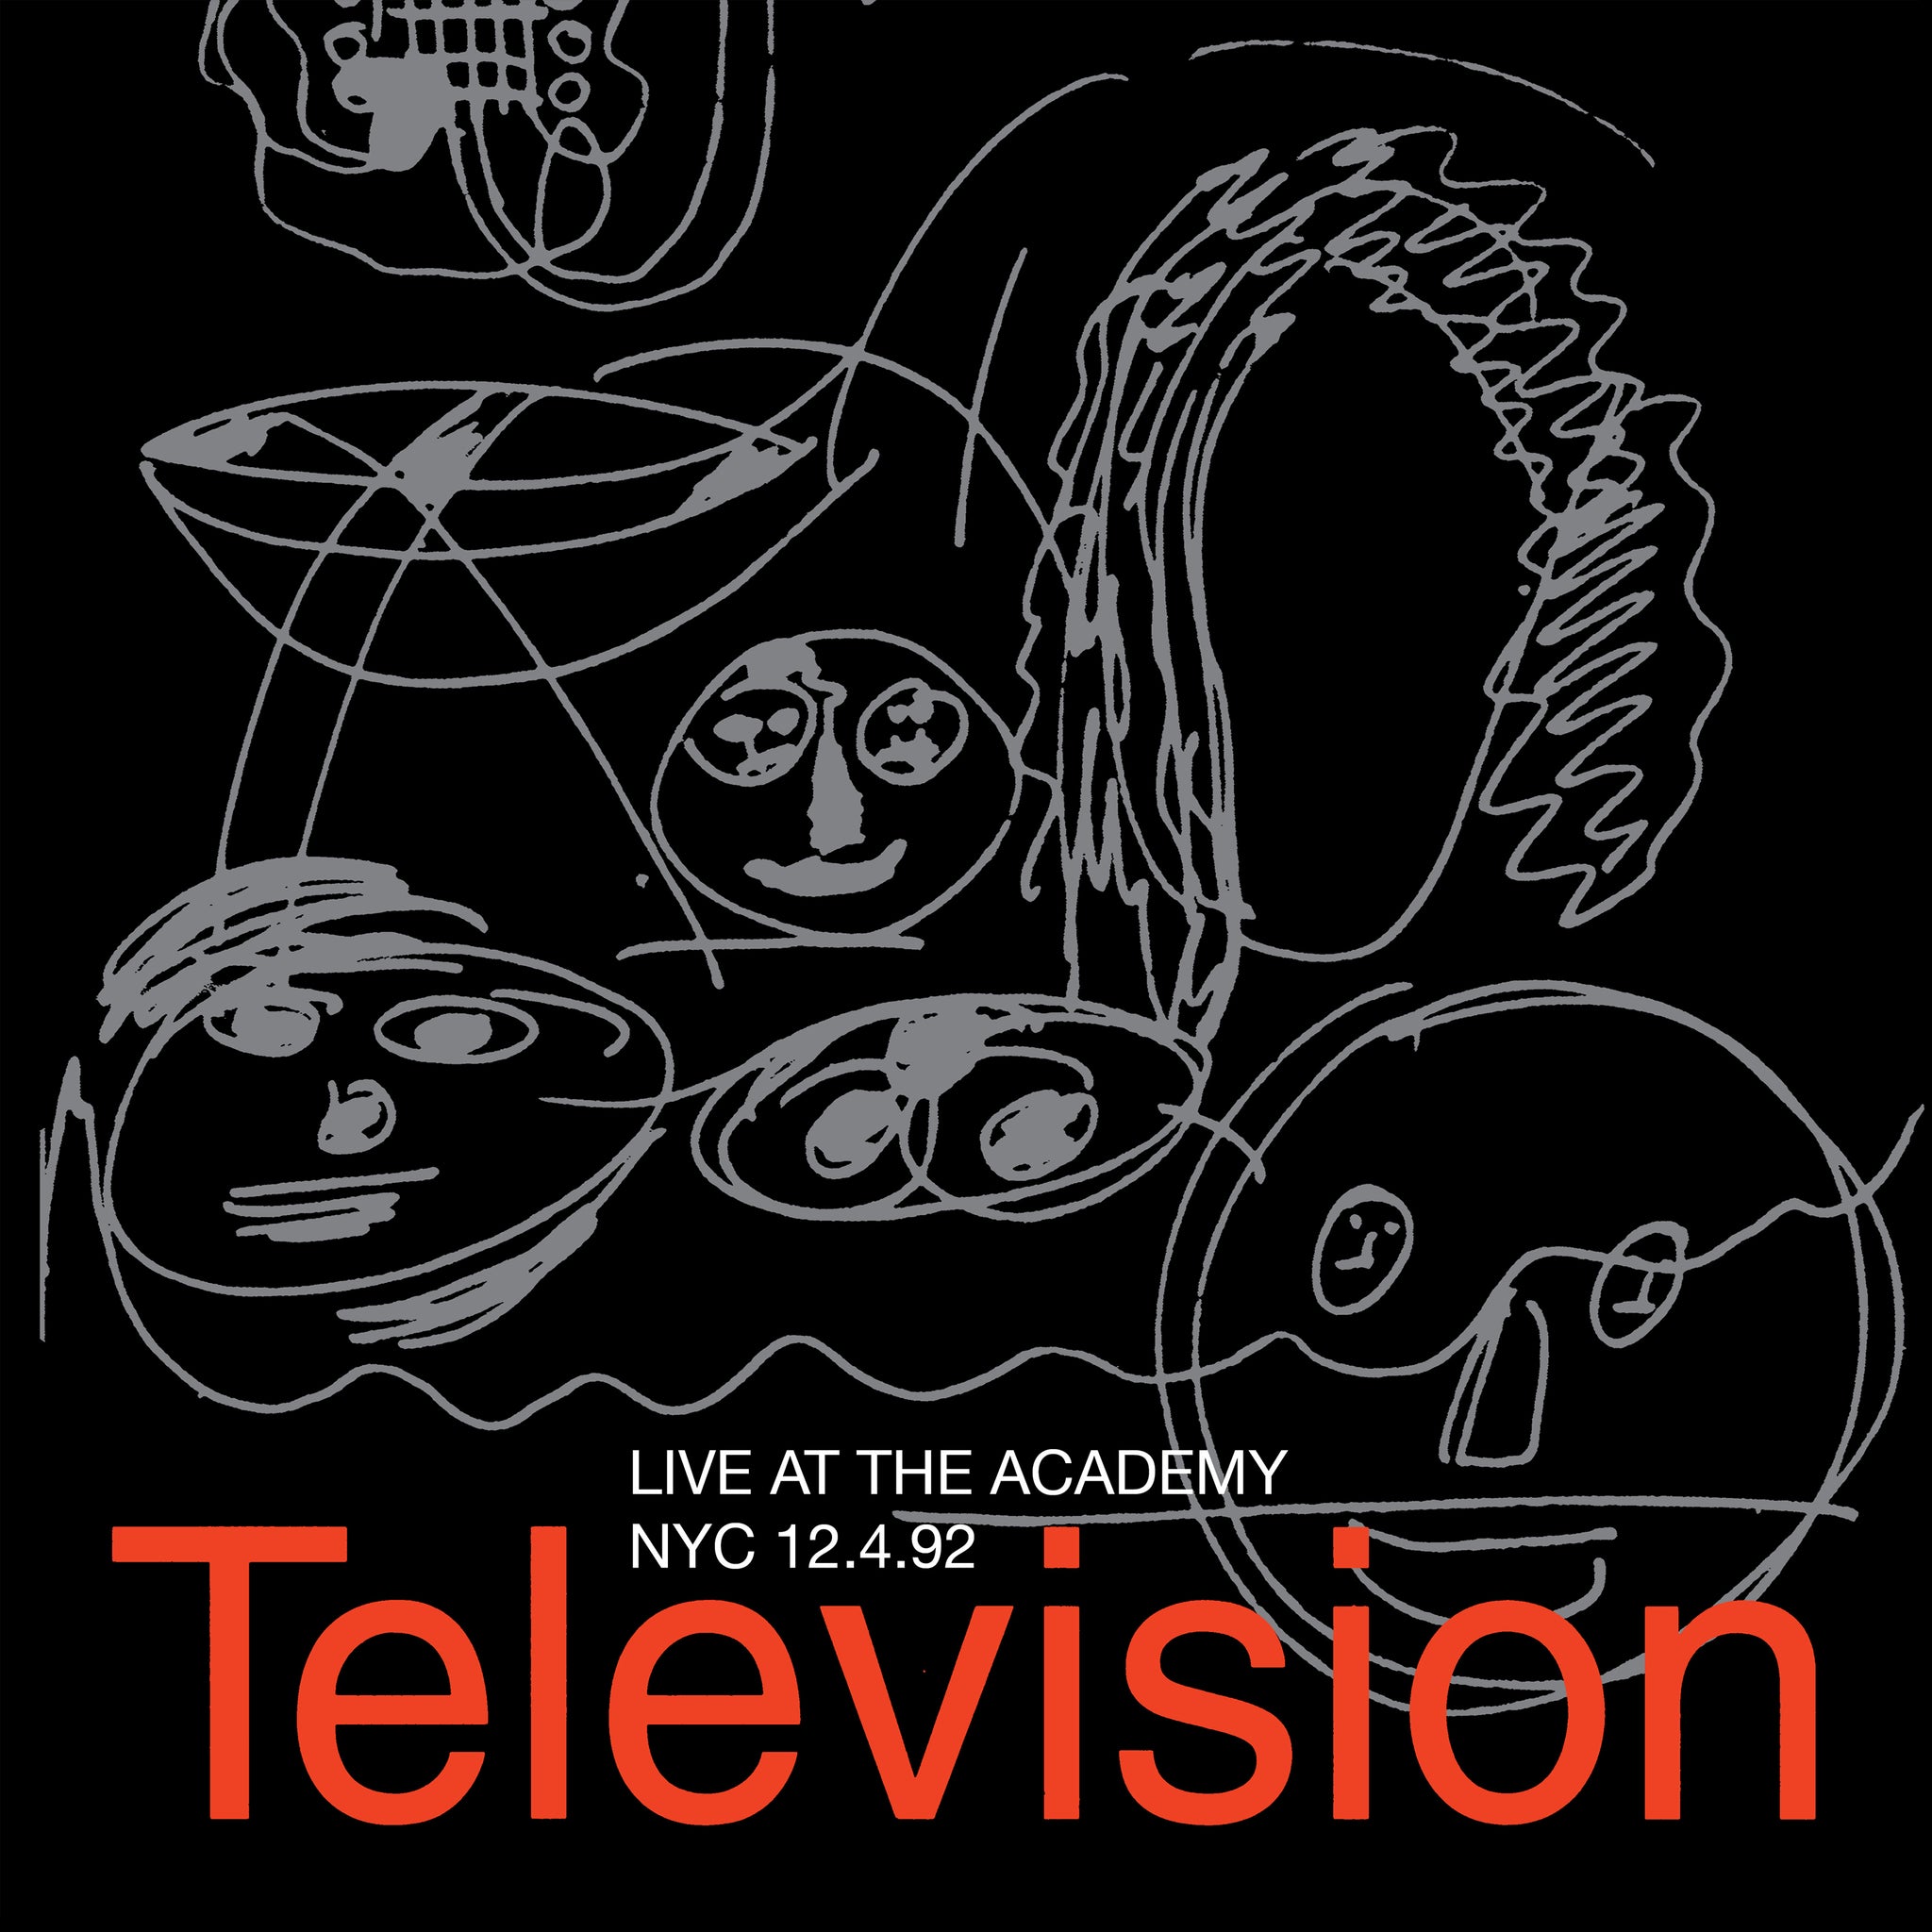 TELEVISION - Live At The Academy NYC 12.4.92 - 2 LP - Coloured Vinyl (TBC)  [RSD 2024]